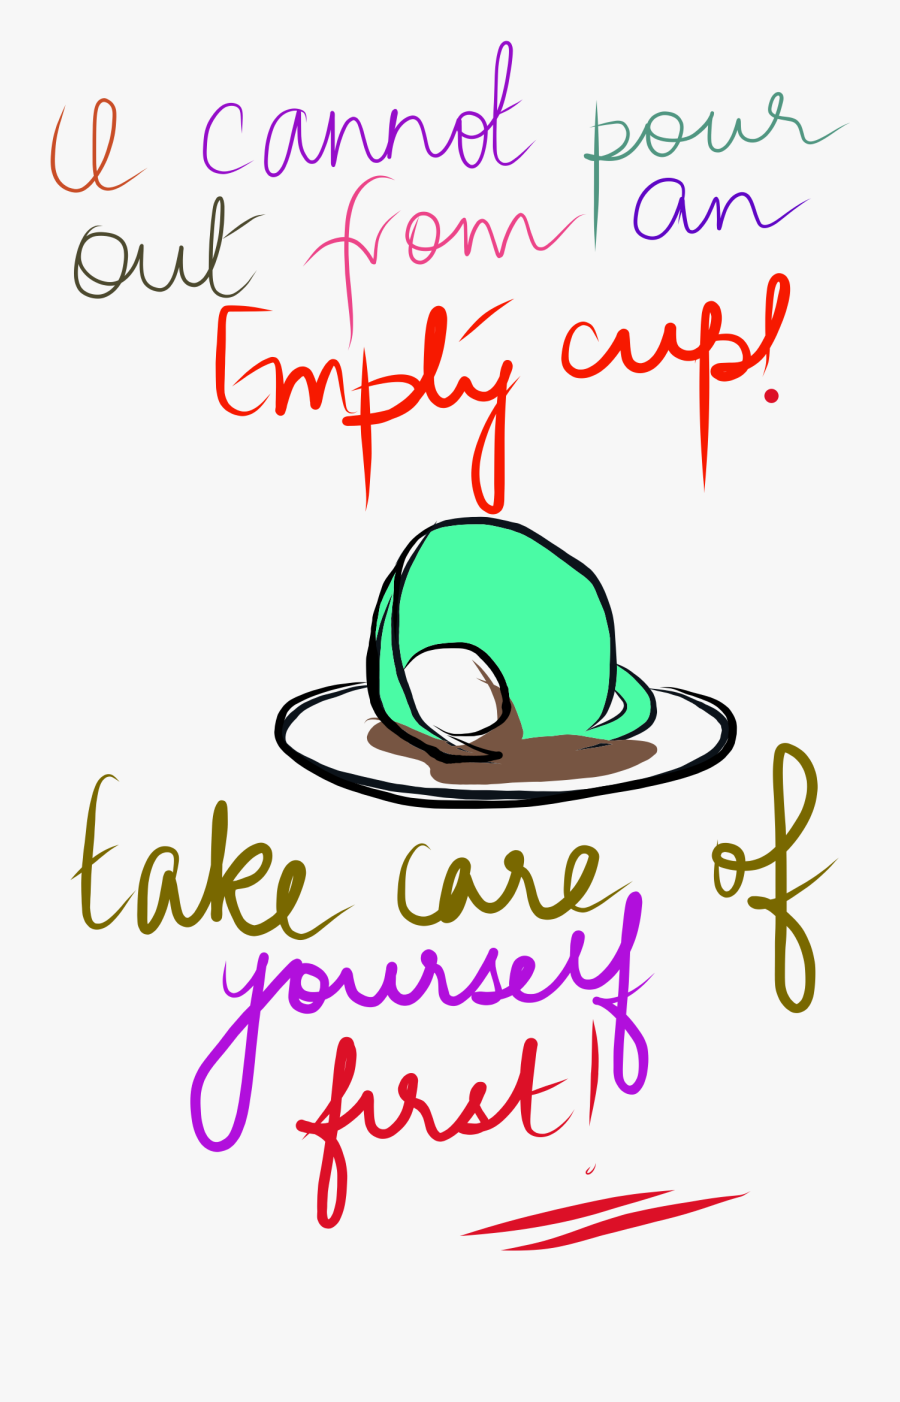 Only You Can Take Care Of Yourself - You Can Care About Yourself Only, Transparent Clipart